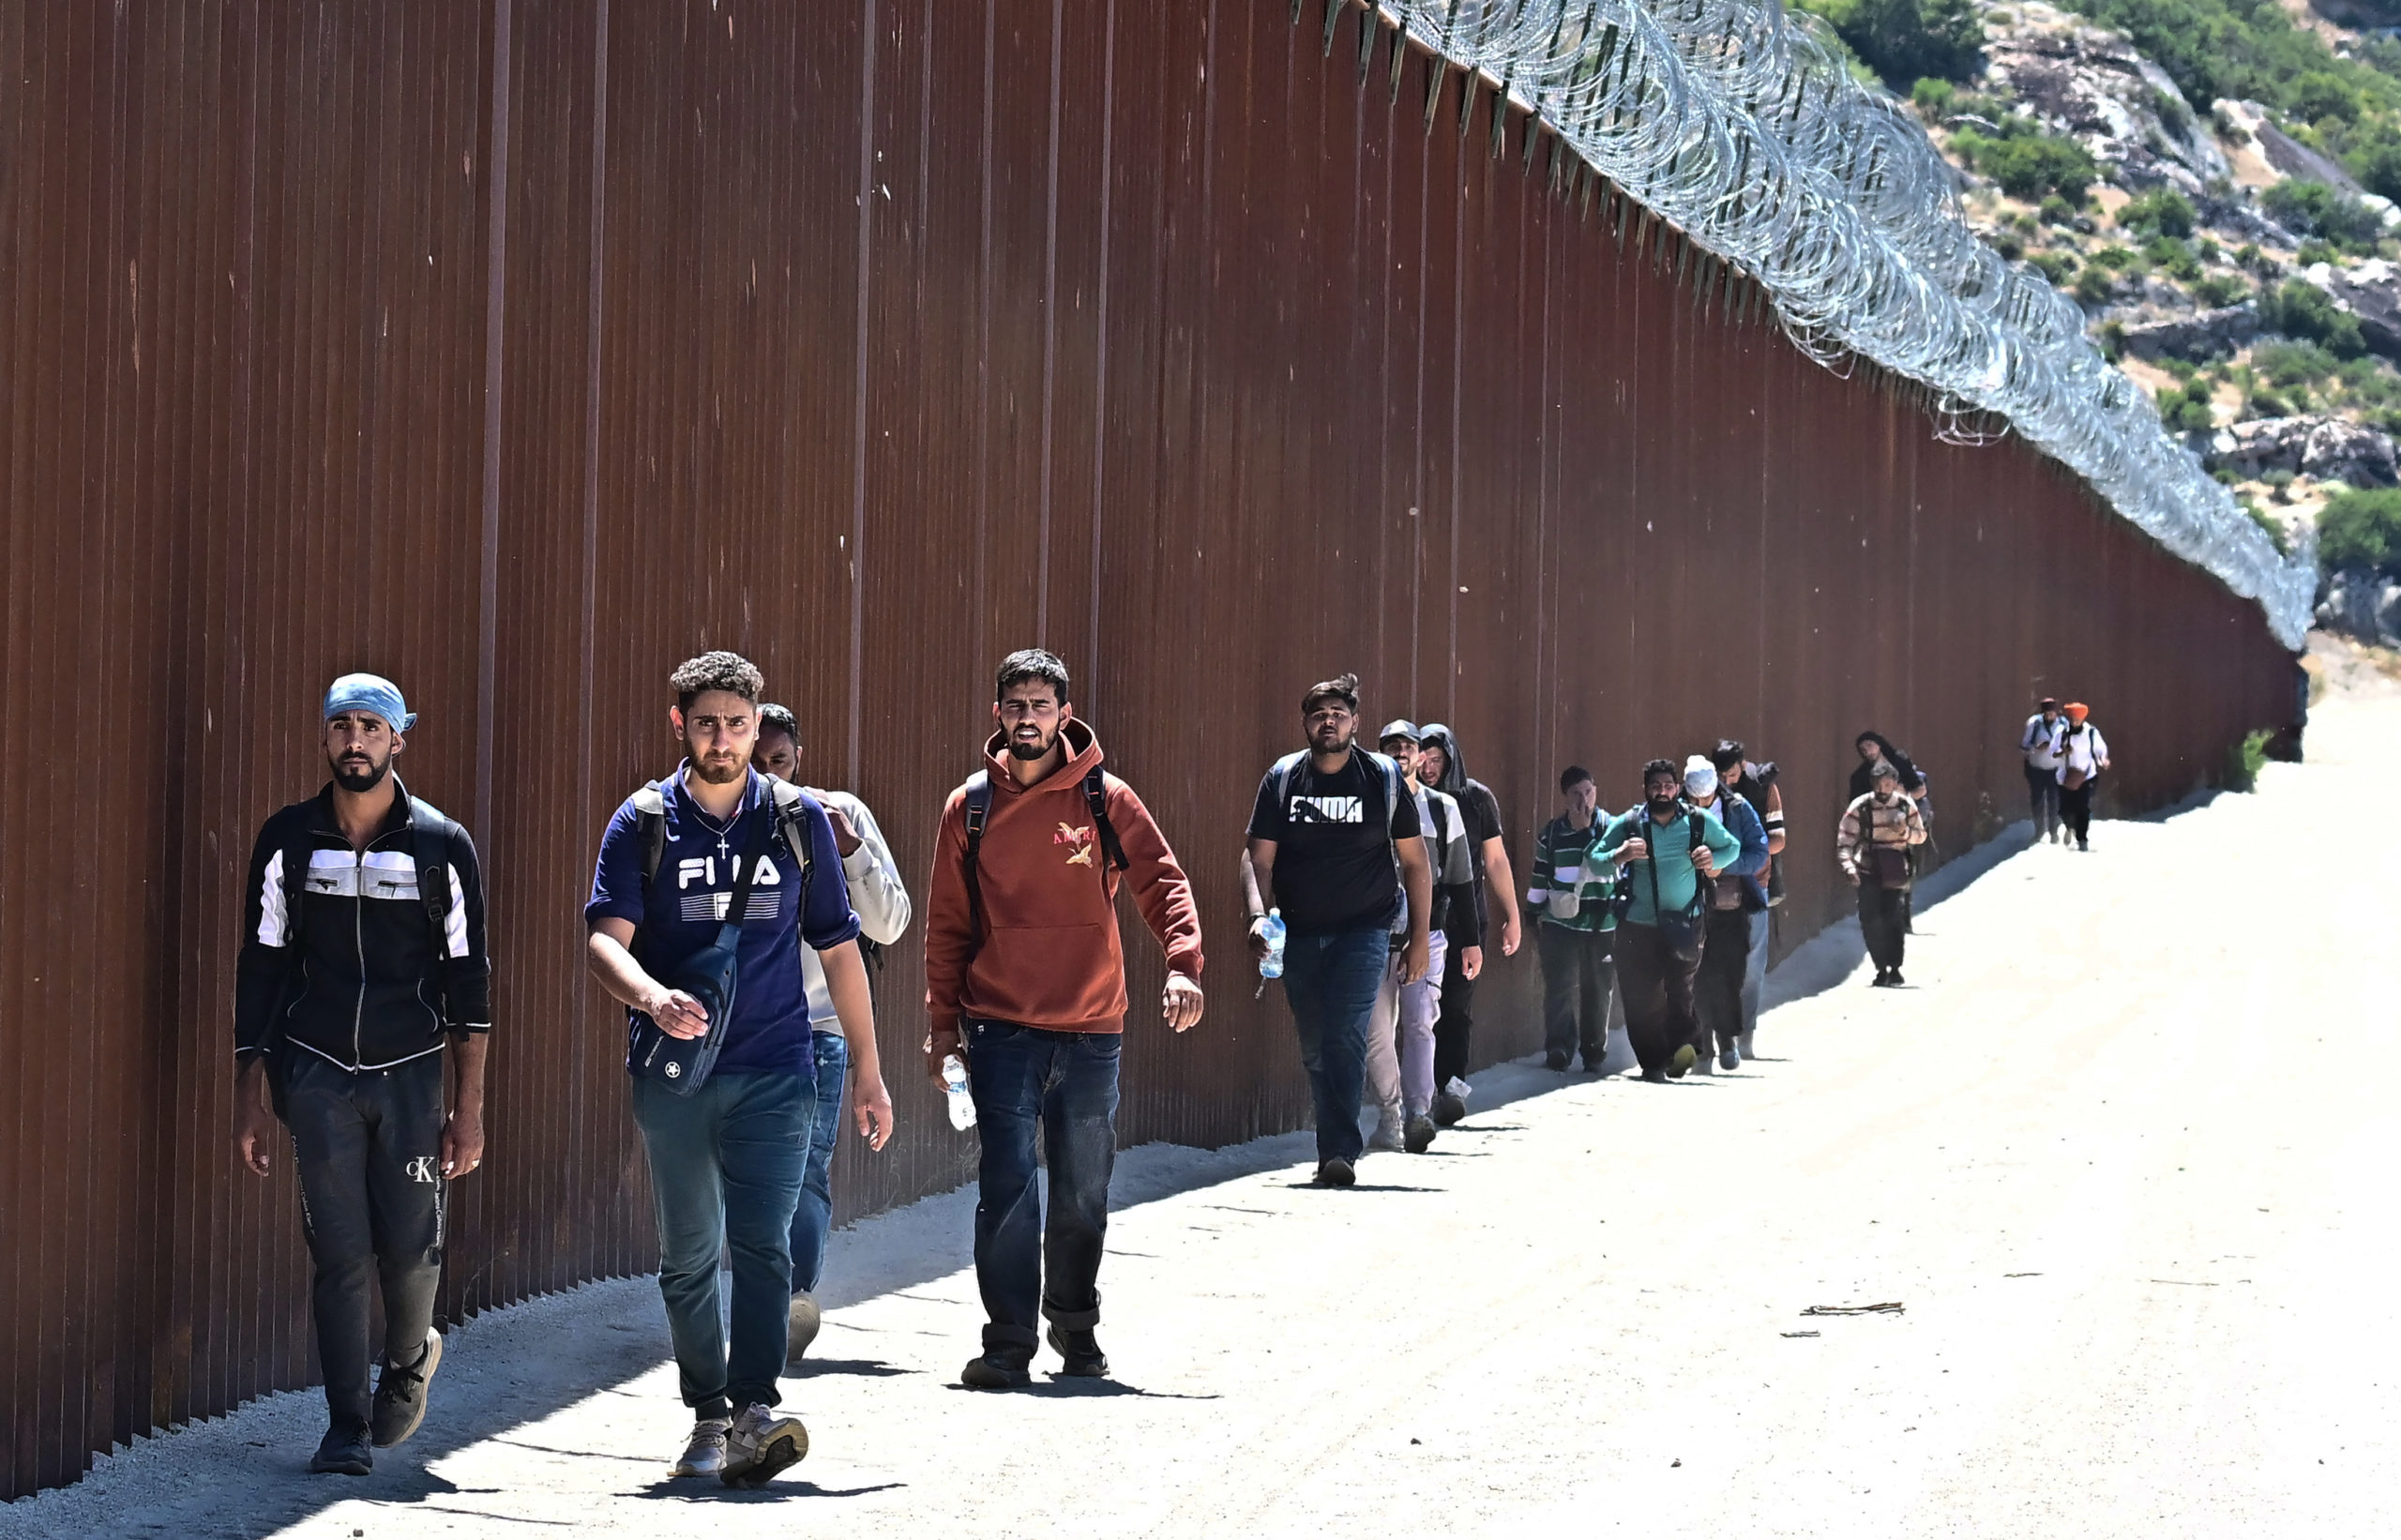 Migrants walk on the US side of the border wall in Jacumba Hot Springs, California on June 5, 2024, after walking across from Mexico. Migrants from countries such as Turkey, Jordan, Guatemala, Nicaragua, China and India made their way on foot into the United States today before being met with by Customs and Border Patrol agents for processing. The United States will temporarily close its Mexico border to asylum seekers starting today, June 5, as President Joe Biden as tries to neutralize his political weakness on migration ahead of November's election battle with Donald Trump. The 81-year-old Democrat signed a long-awaited executive order taking effect at midnight to "gain control" of the southern frontier with Mexico, after record numbers of illegal border crossings sparked concerns among voters. (Photo by FREDERIC J. BROWN/AFP via Getty Images)